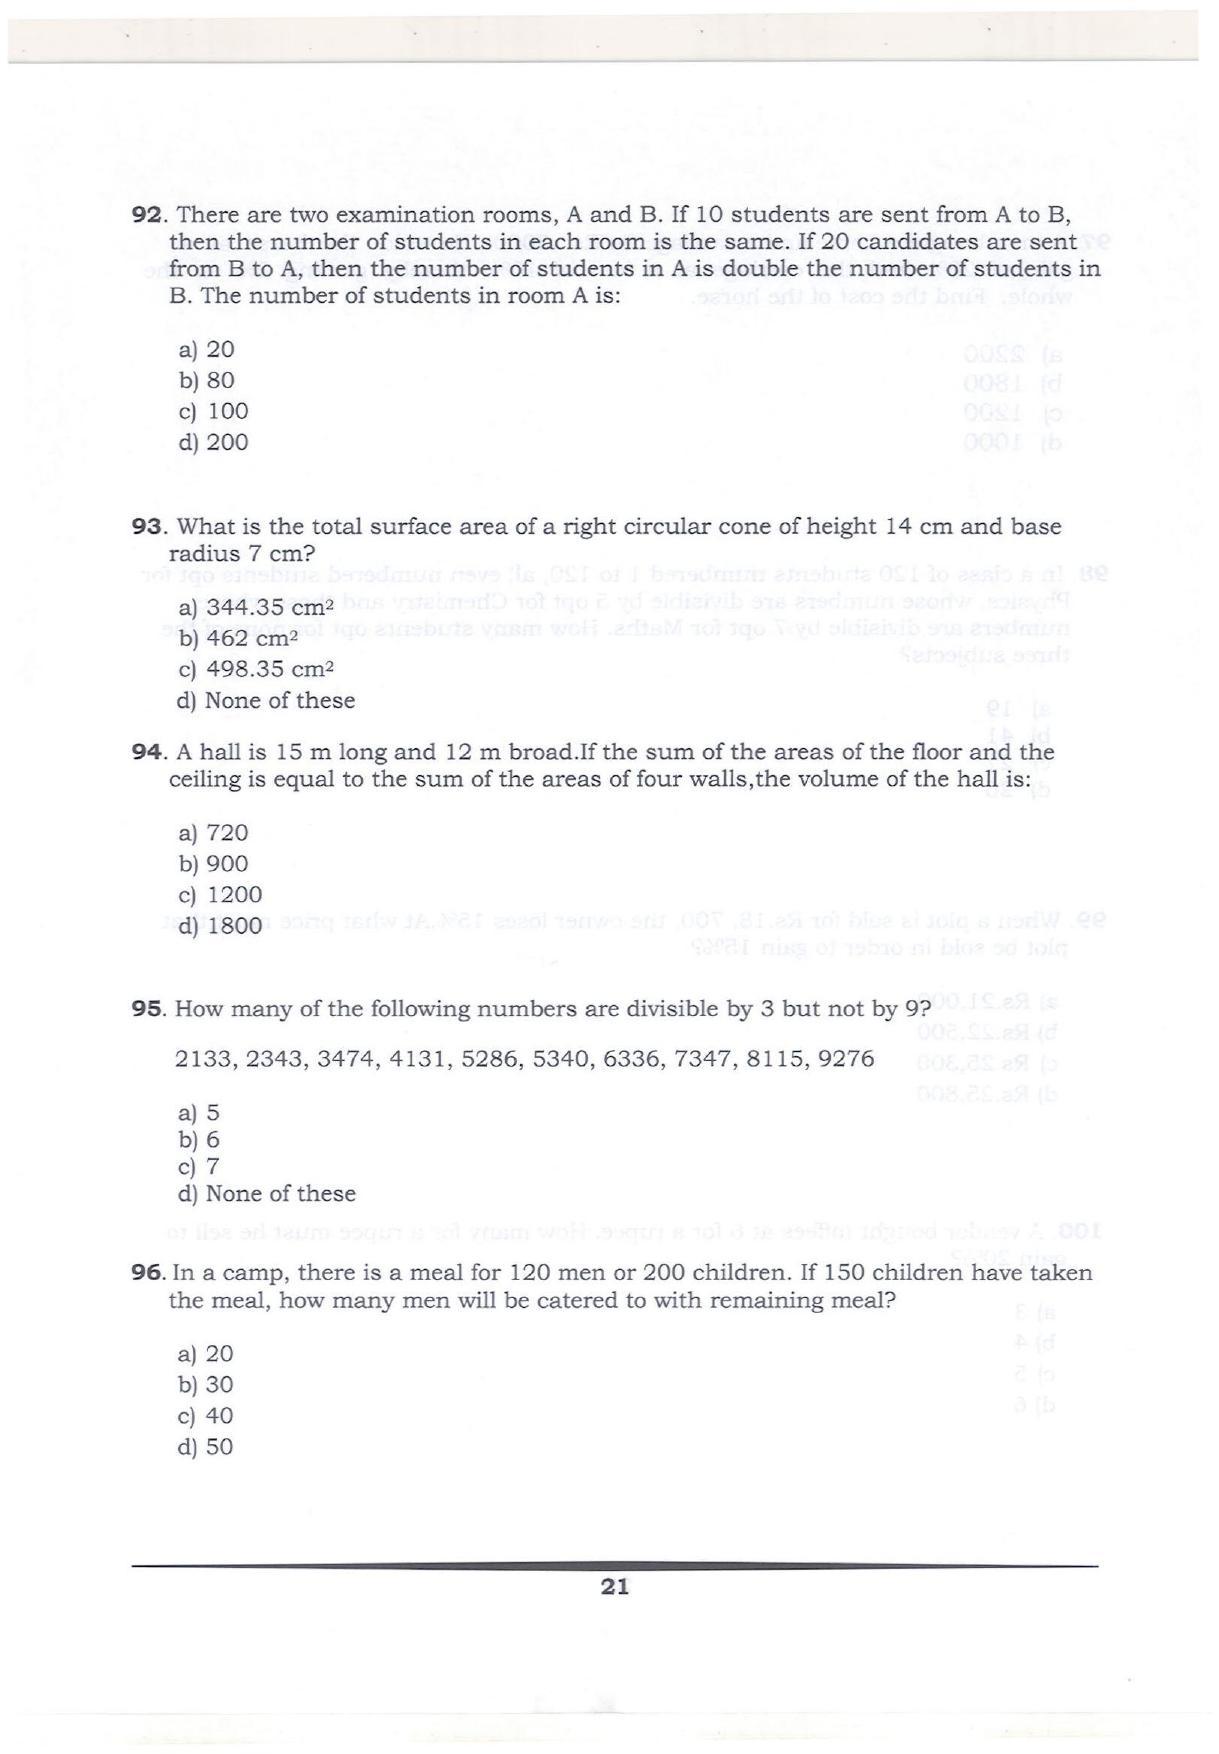 KMAT Question Papers - February 2018 - Page 20